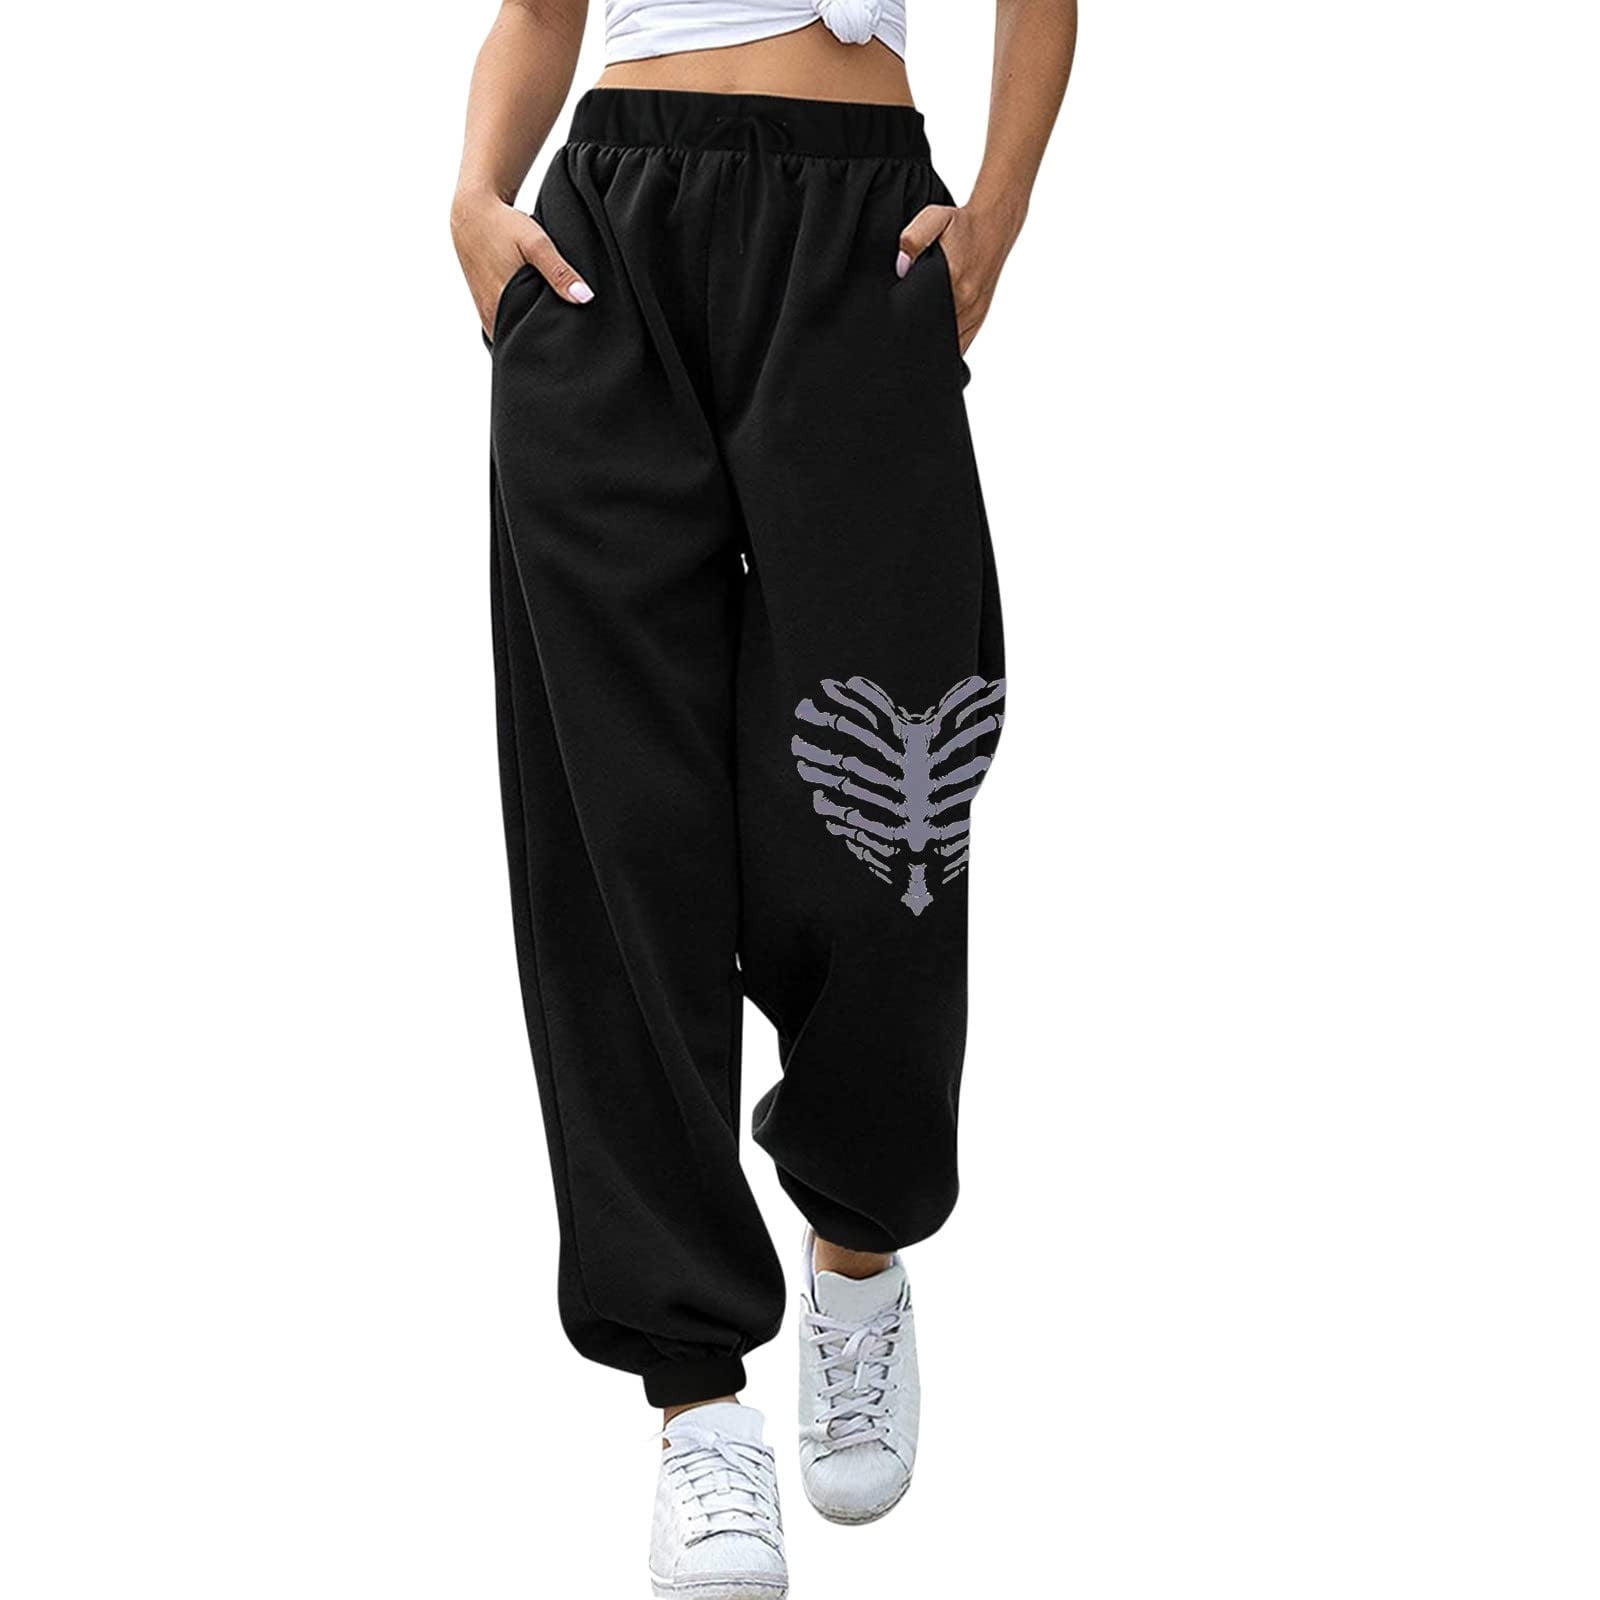 Reduced RQYYD Women's Sweatpants with Pocket, Women Active